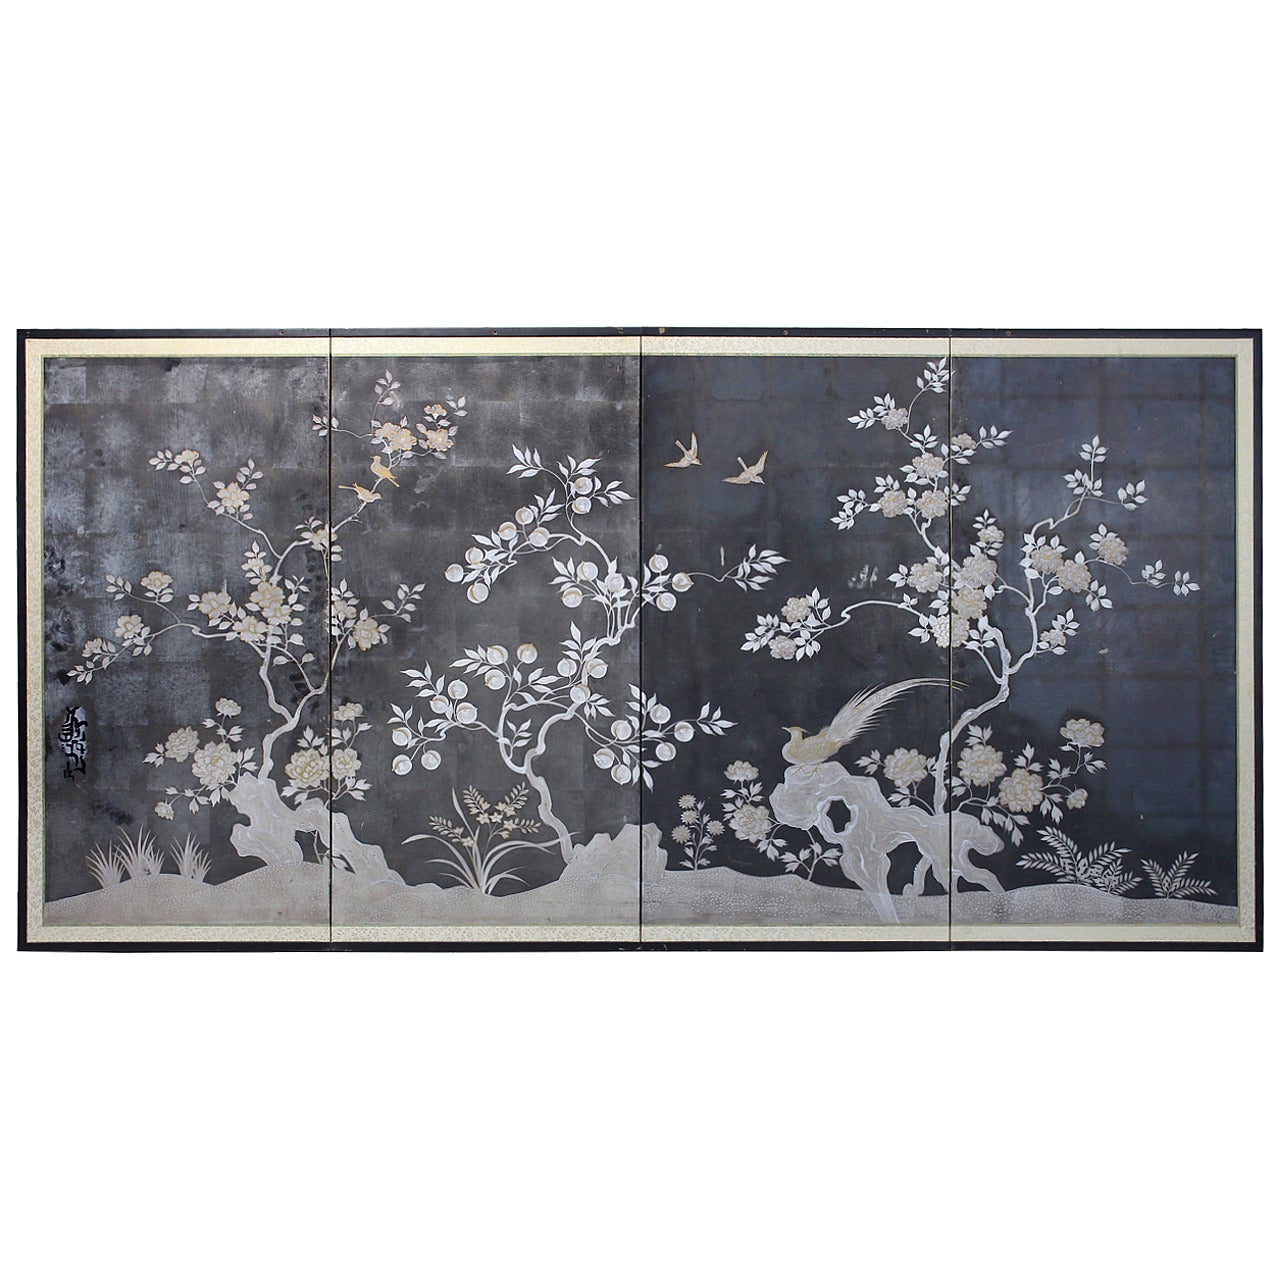 Large Antique Japanese Folding Screen Painting